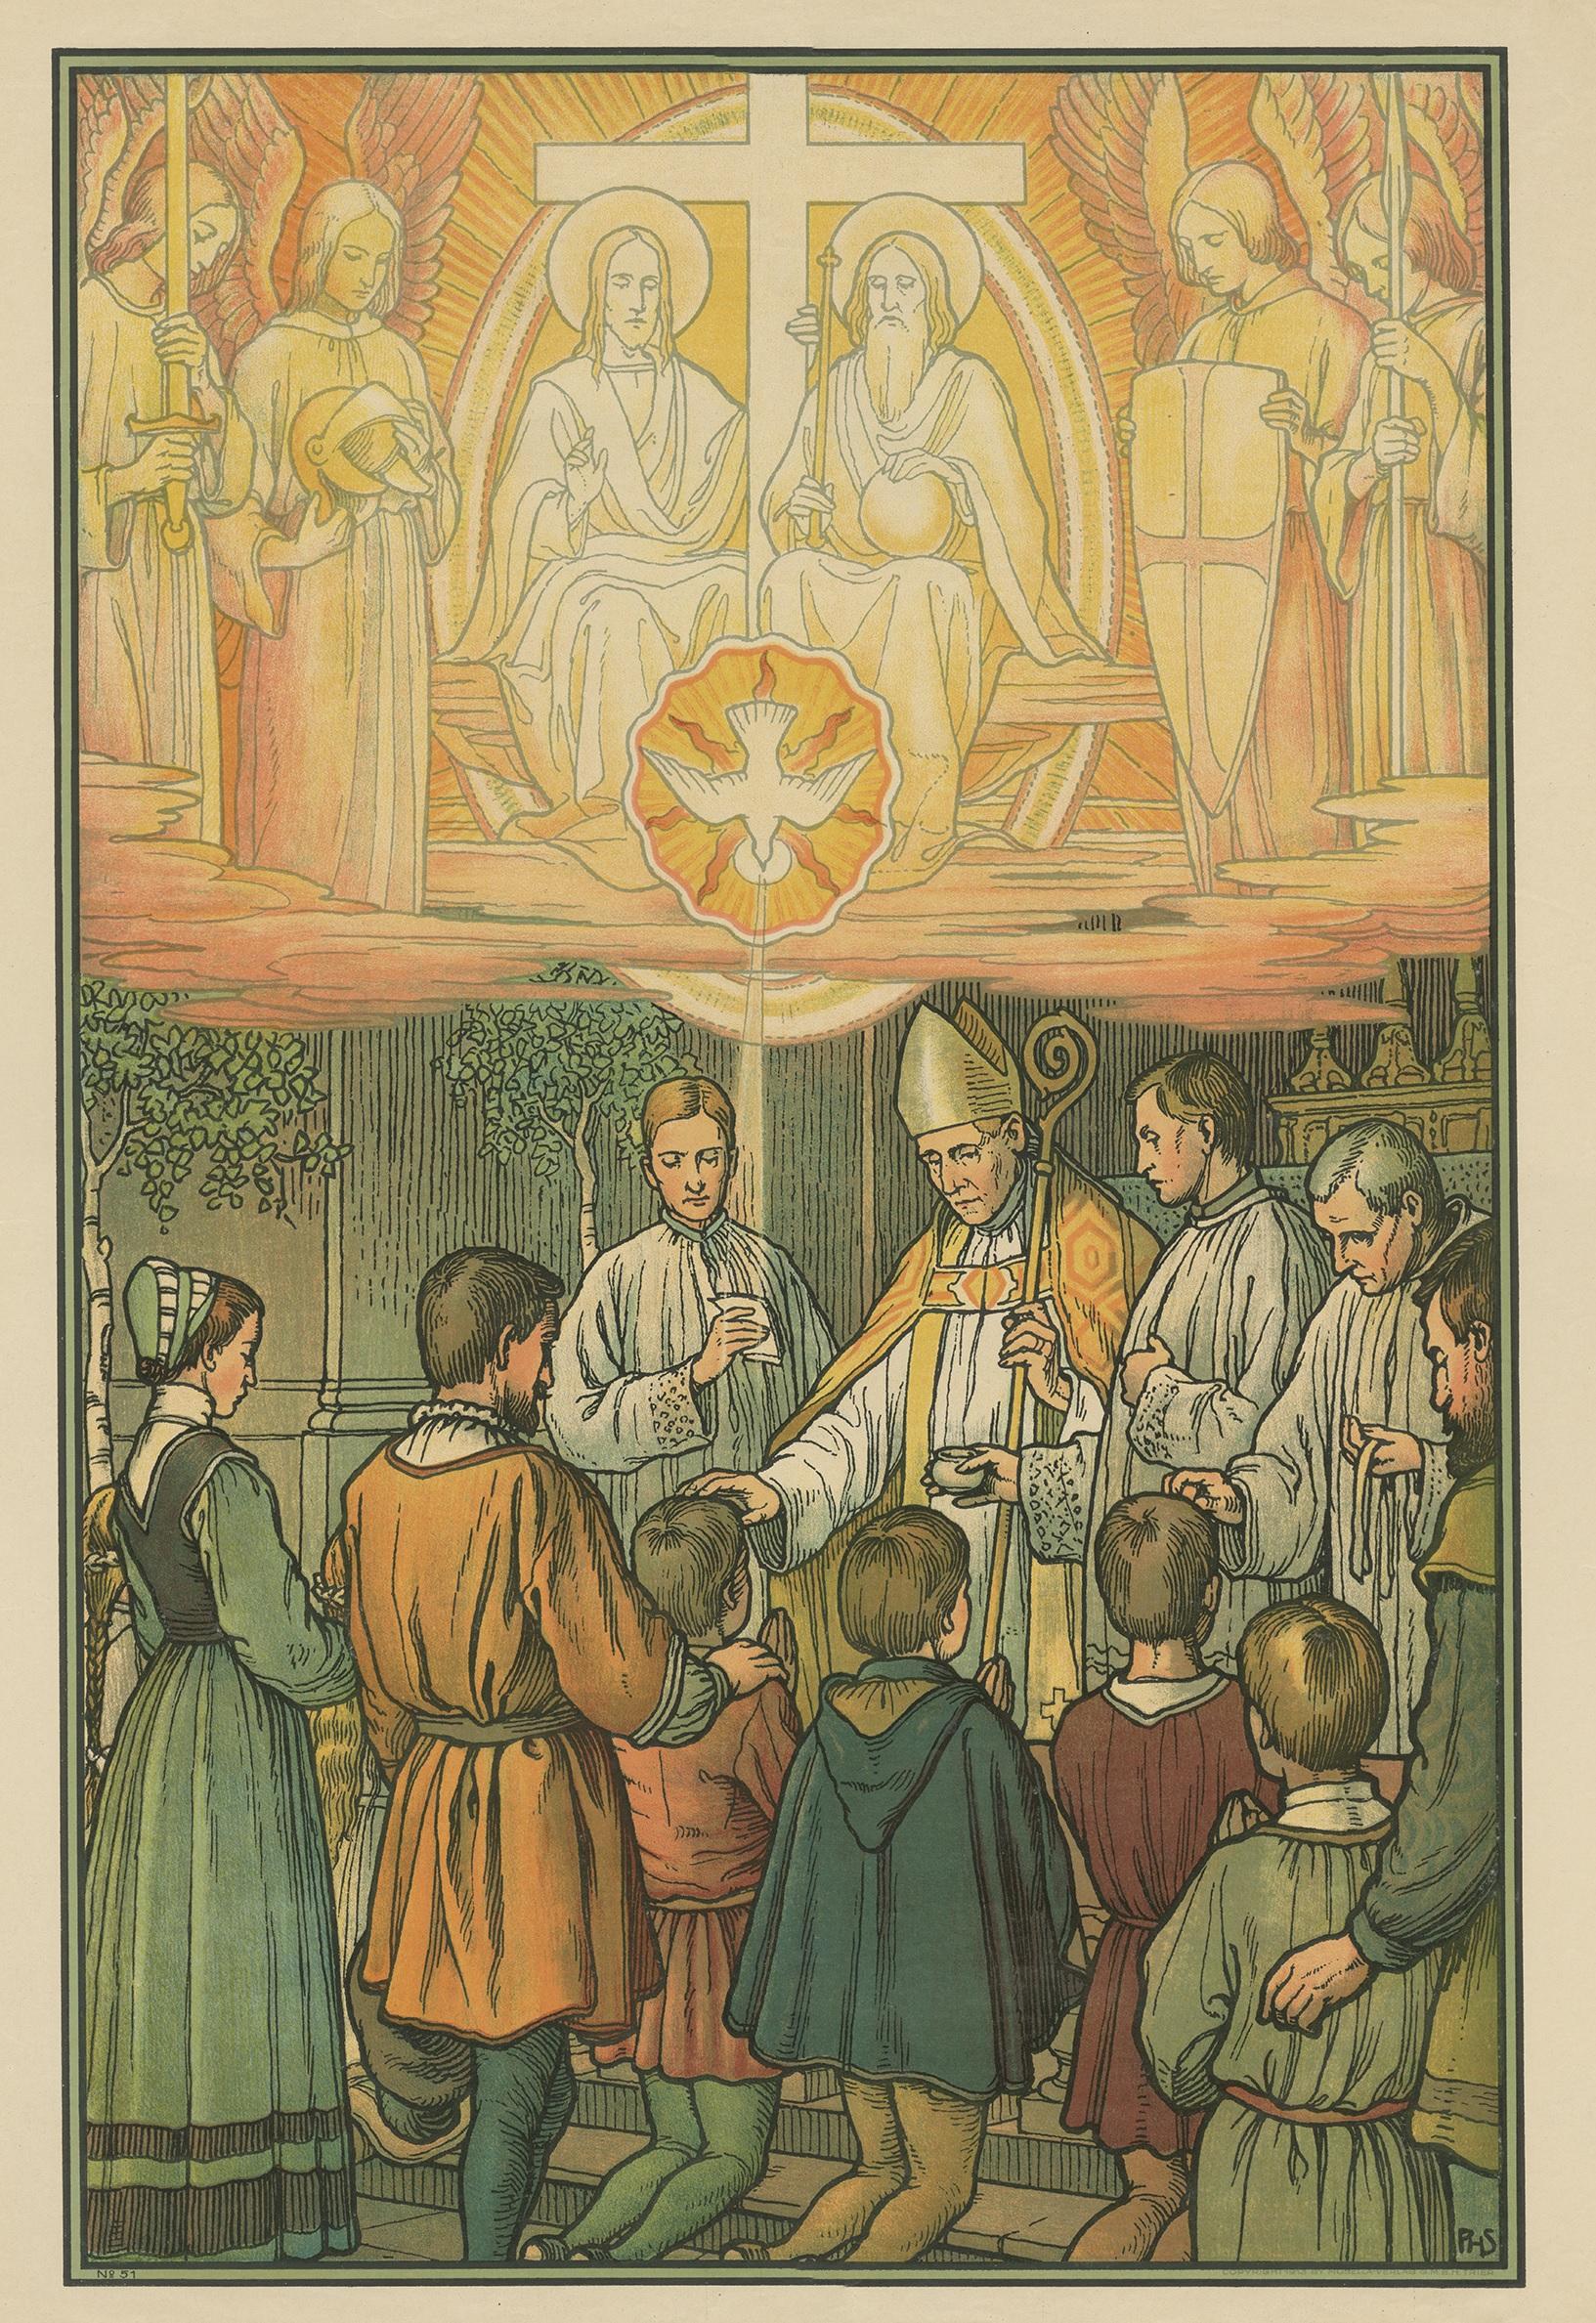 Large antique print of the seven sacraments. Published by Mosella-Verlag, 1913. This print originates from a series titled 'Kathol. Schulbibelwerk von Dr. Ecker'.